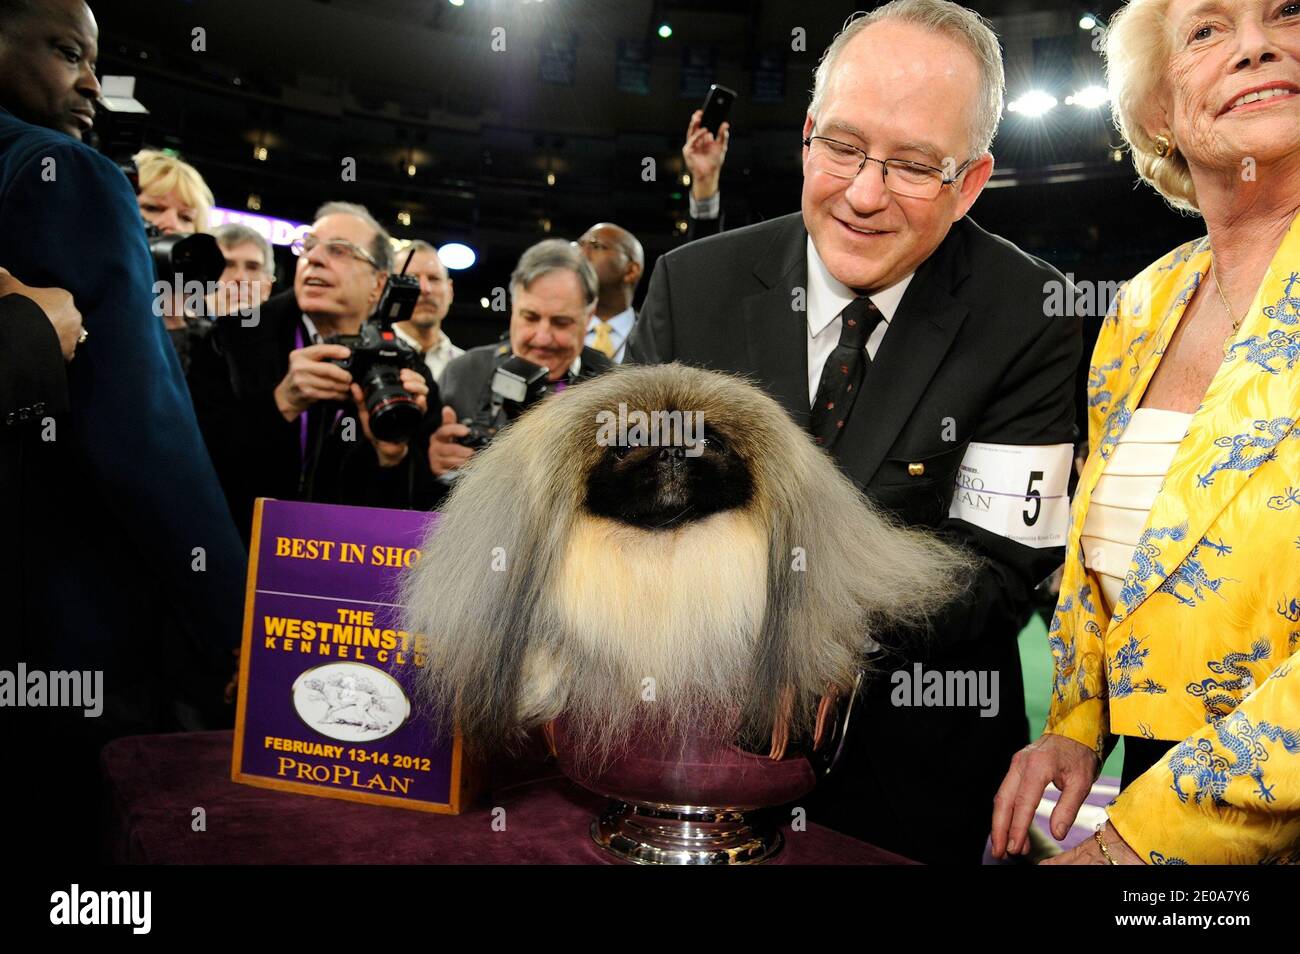 Malachy the Pekingese wins the best in show at the 136th Annual Westminster Kennel Club dog show, held at Madison Square Garden in New York City, NY, USA on February 14, 2012. Photo by Graylock/ABACAPRESS.COM Stock Photo